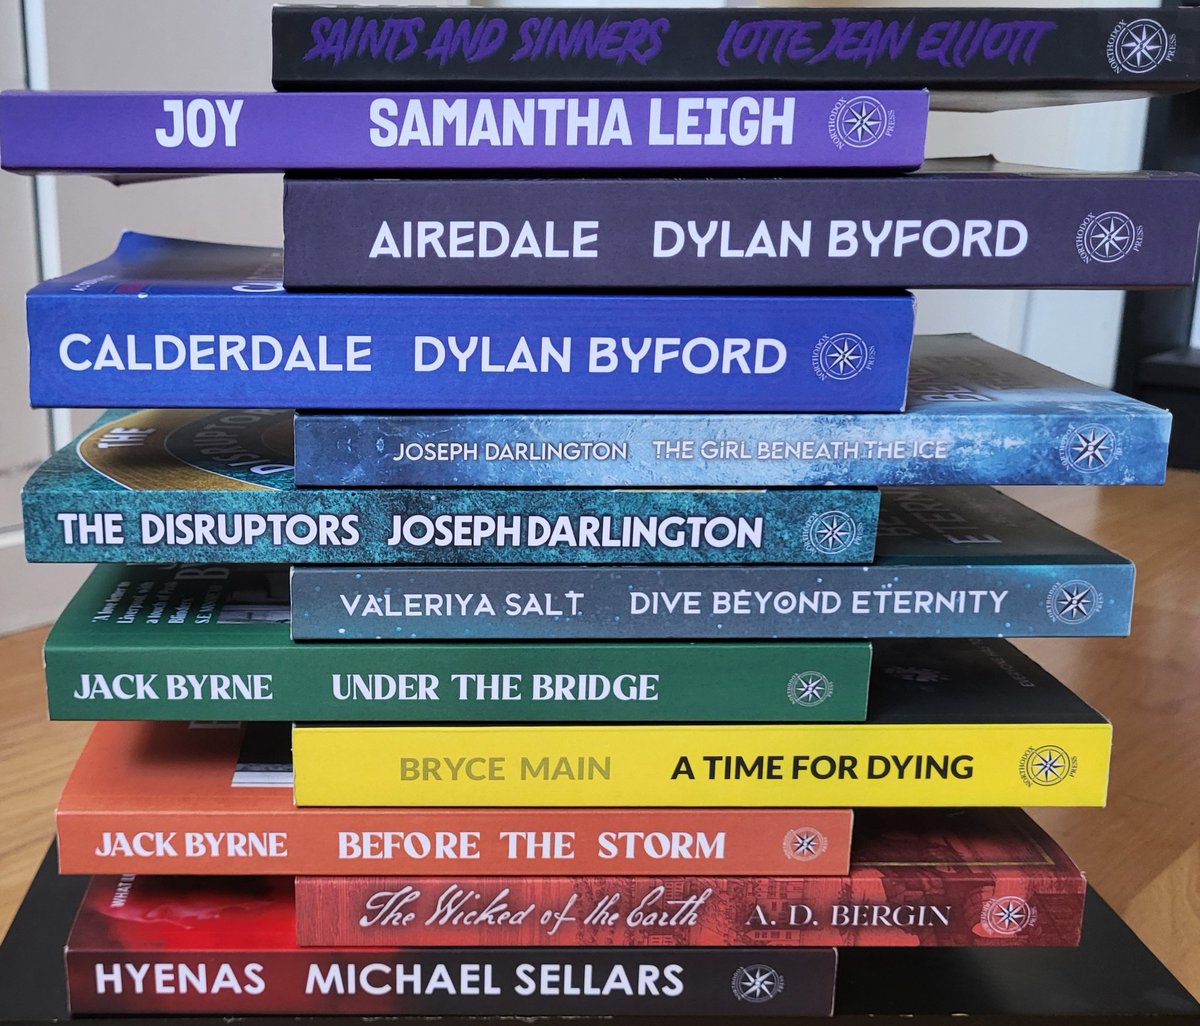 We saw someone doing a rainbow stack challenge on Instagram. Well, here is the Northodox attempt 😍 northodox.co.uk/bookstore